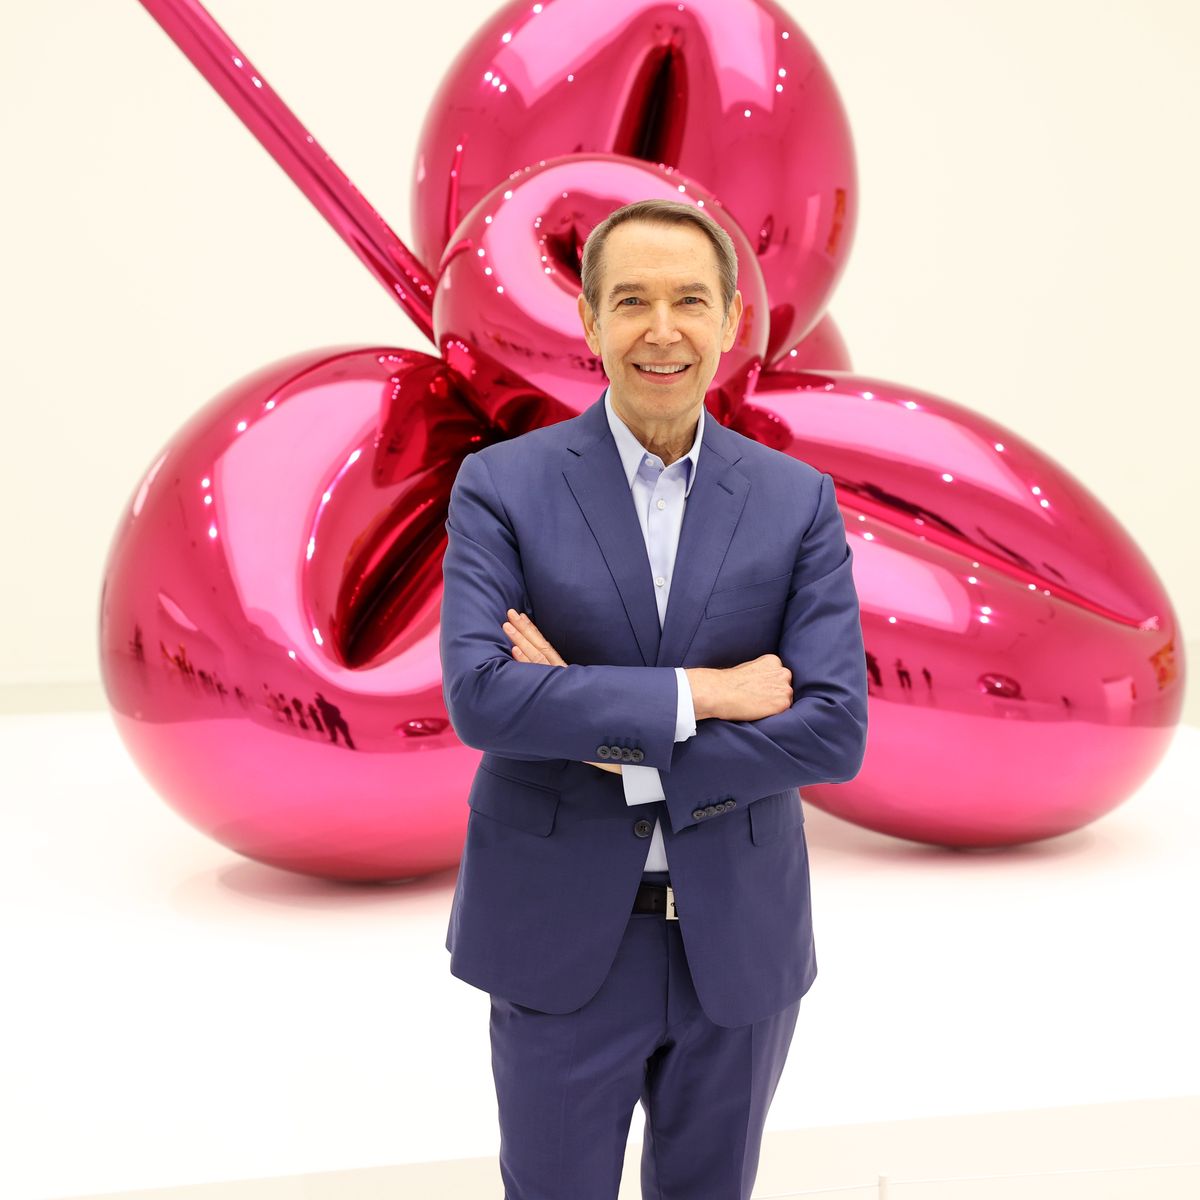 doha, qatar   november 20 jeff koons poses during the press preview of his exhibition “lost in america” on november 20, 2021 at qatar museums gallery al riwaq in doha, qatar the exhibition opens as part of qatarcreates, a cultural celebration connecting the fields of art, fashion, and design through a diverse program of exhibitions, awards, public talks, and special events, all taking place in the heart of doha photo by cindy ordgetty images for qatar museums